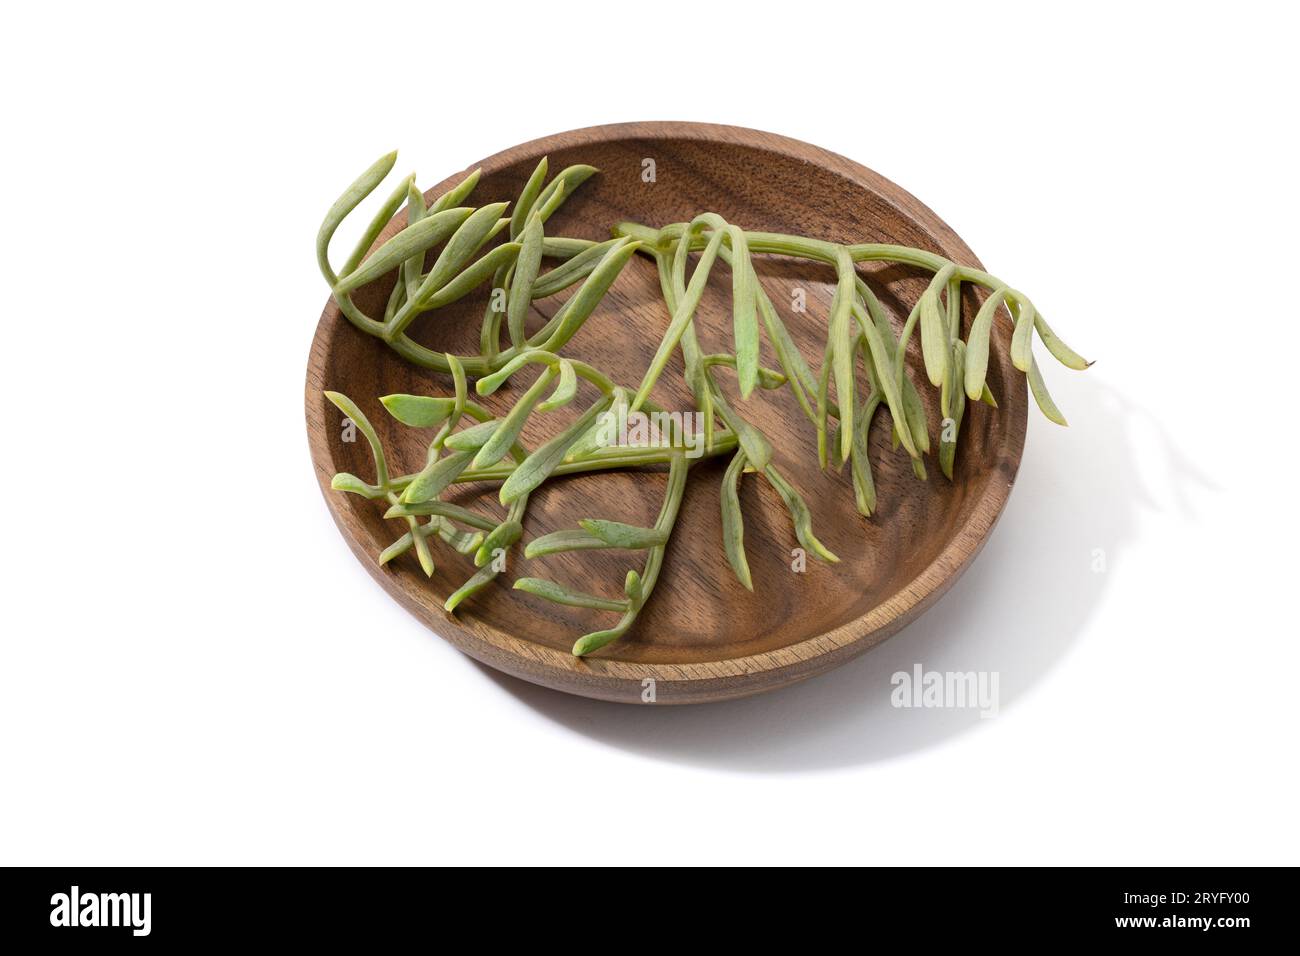 Fresh Sea fennel leaves on wooden plate isolated on white background. Crithmum maritimum Stock Photo